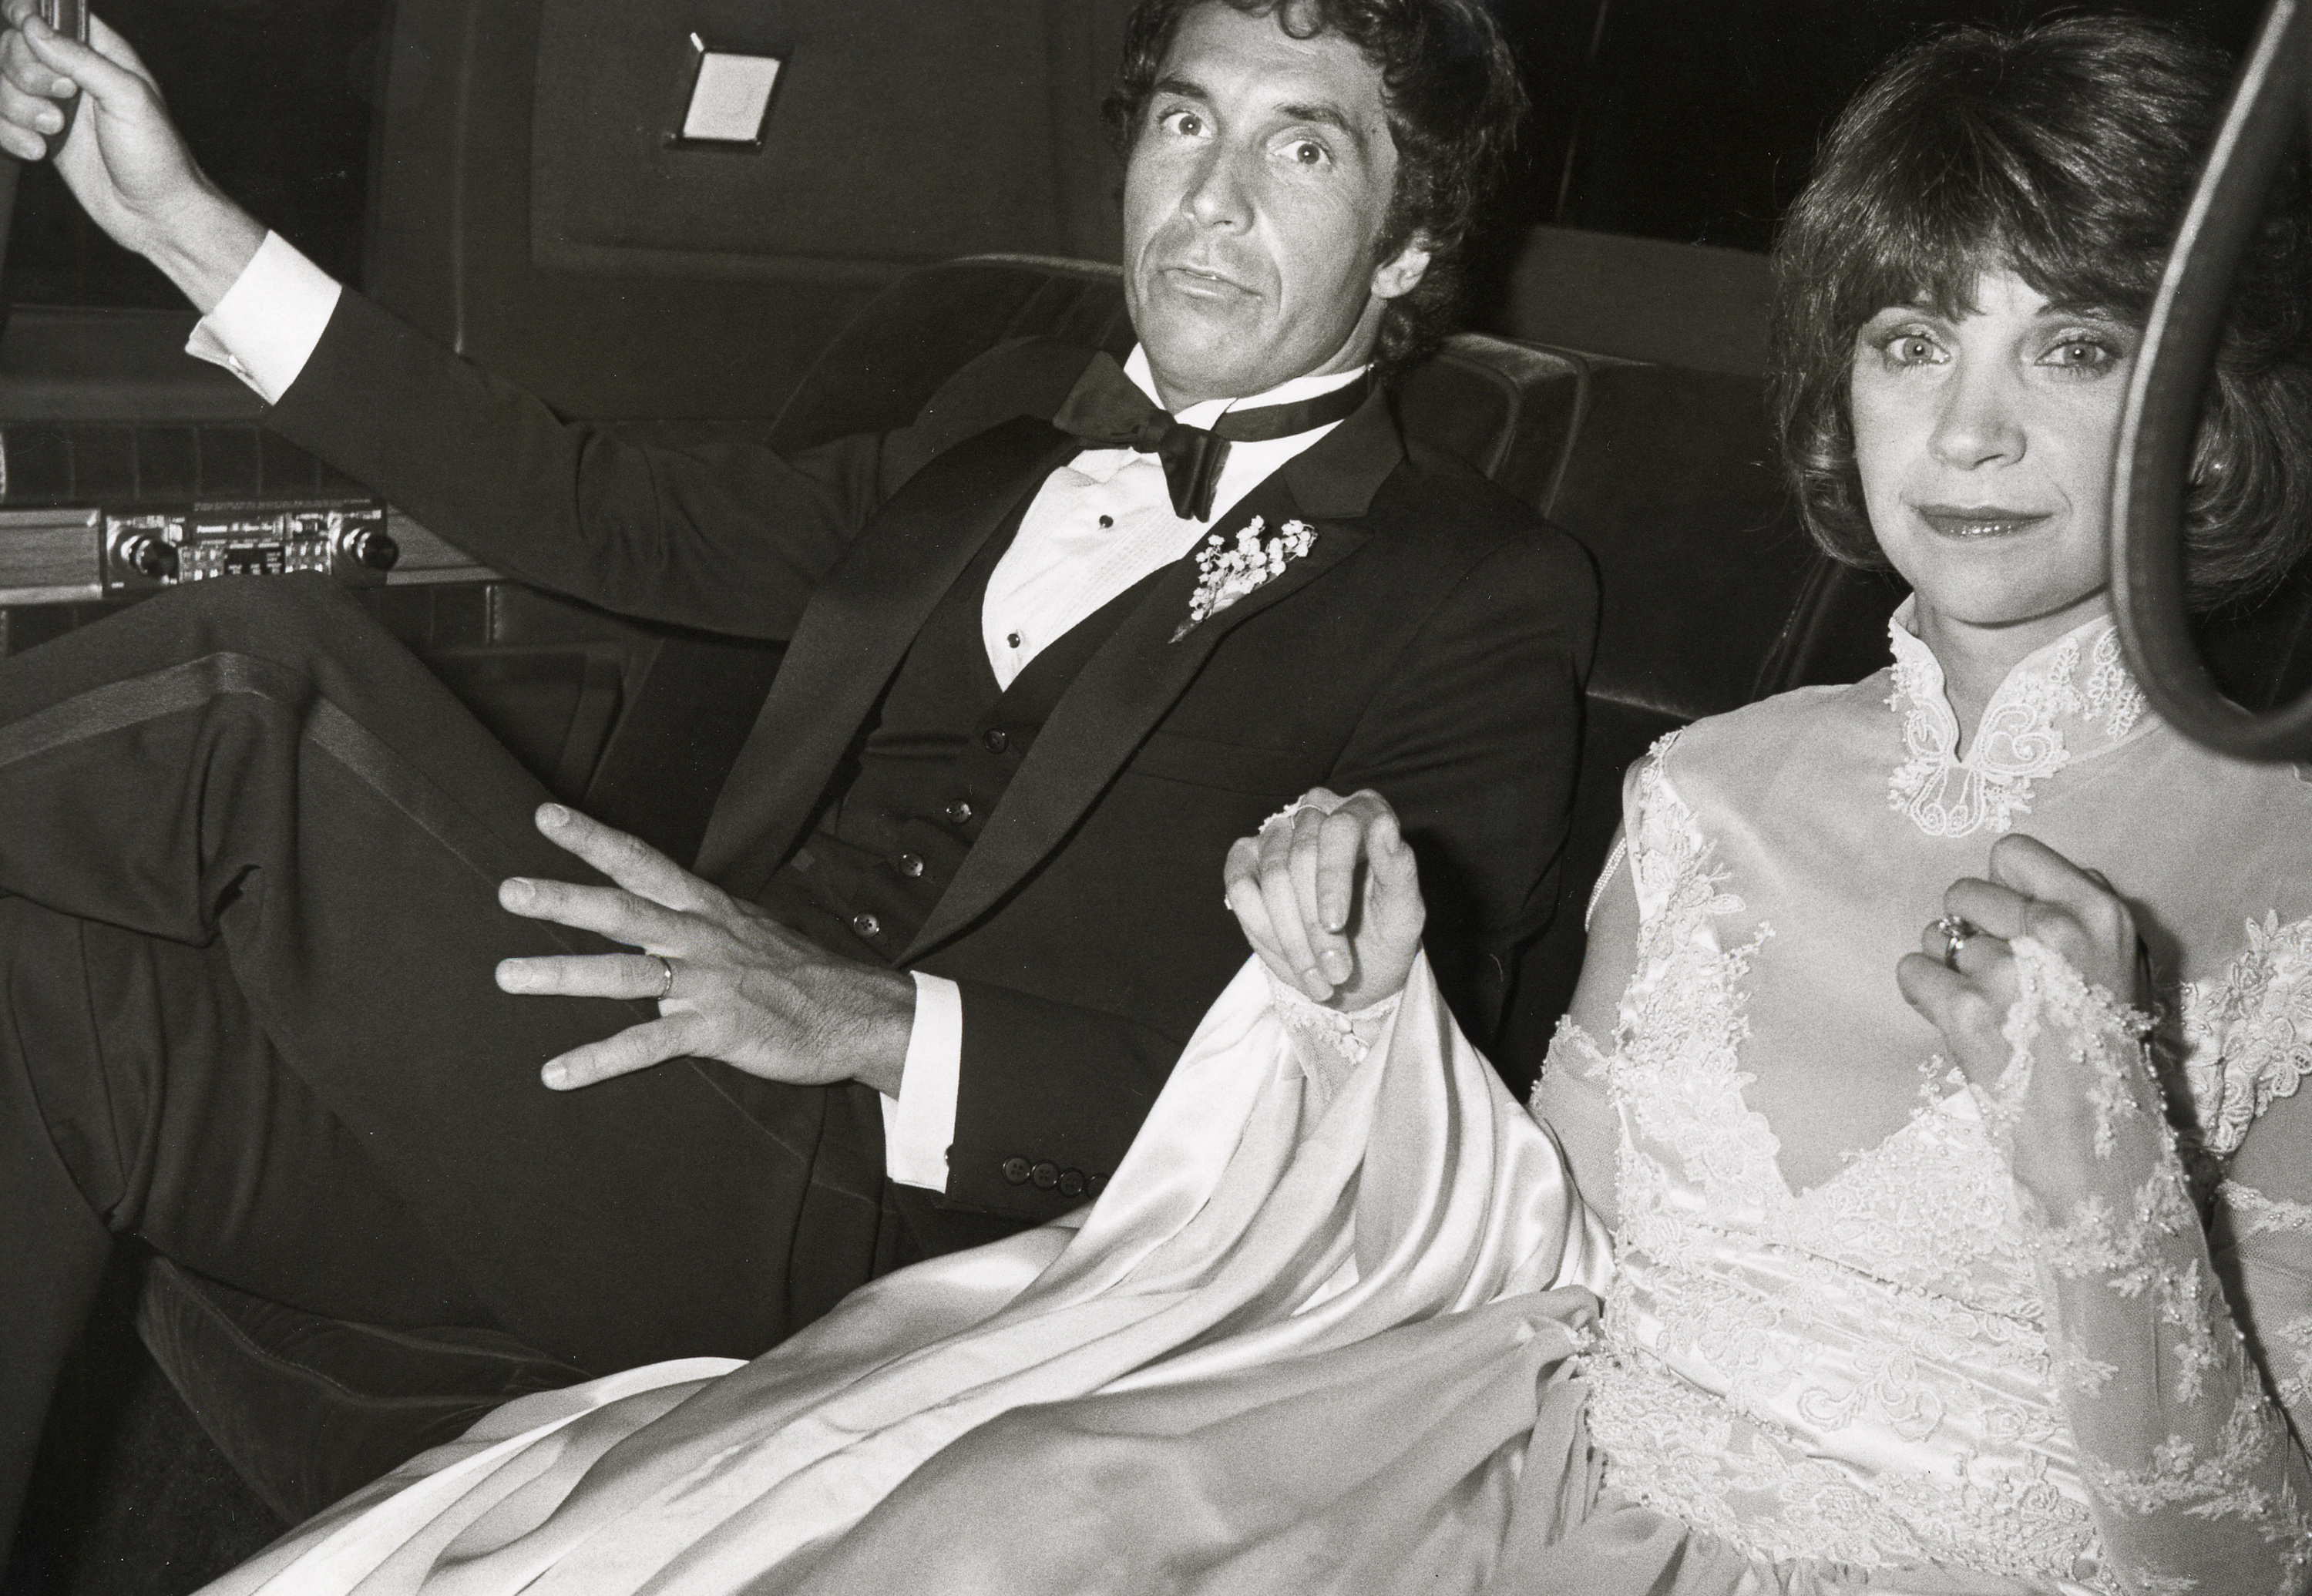 Bill Hudson and Cindy Williams at their Wedding Reception in Santa Monica in 1982 | Source: Getty Images